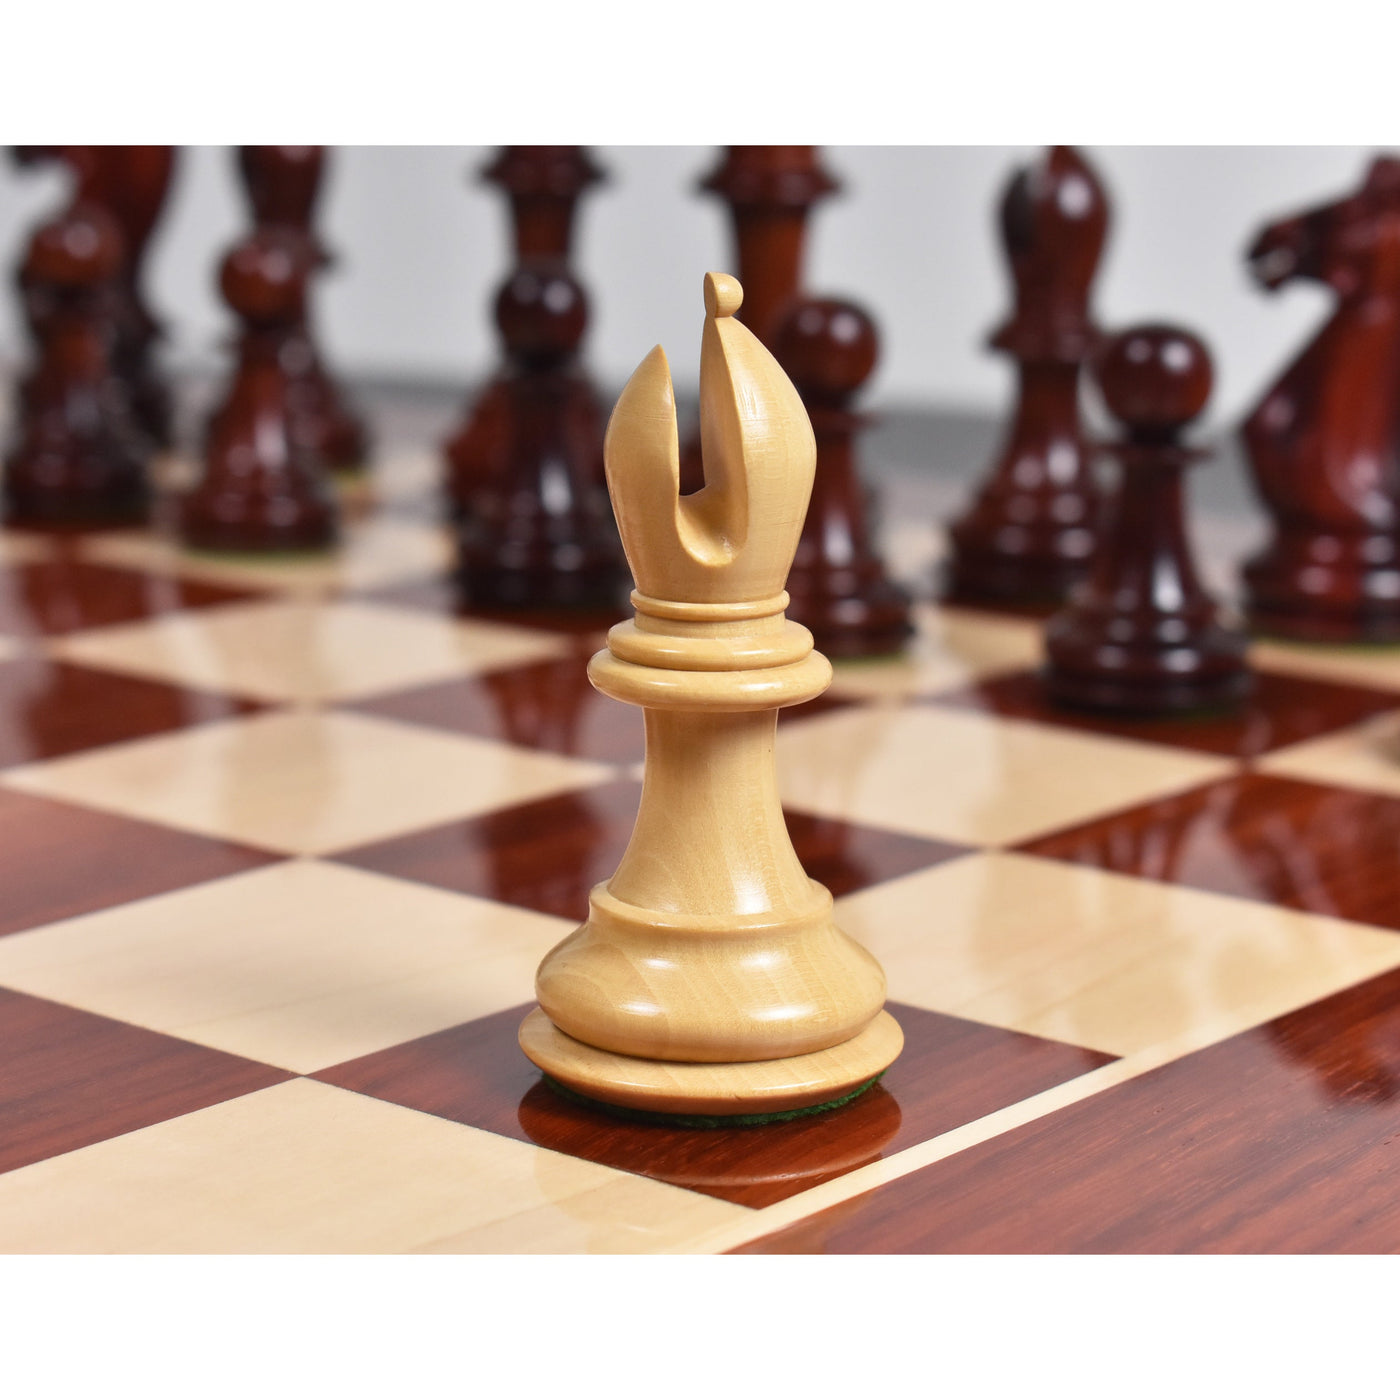 4.1″ Traveller Staunton Luxury Chess Set - Chess Pieces Only – Bud Rose Wood & Boxwood